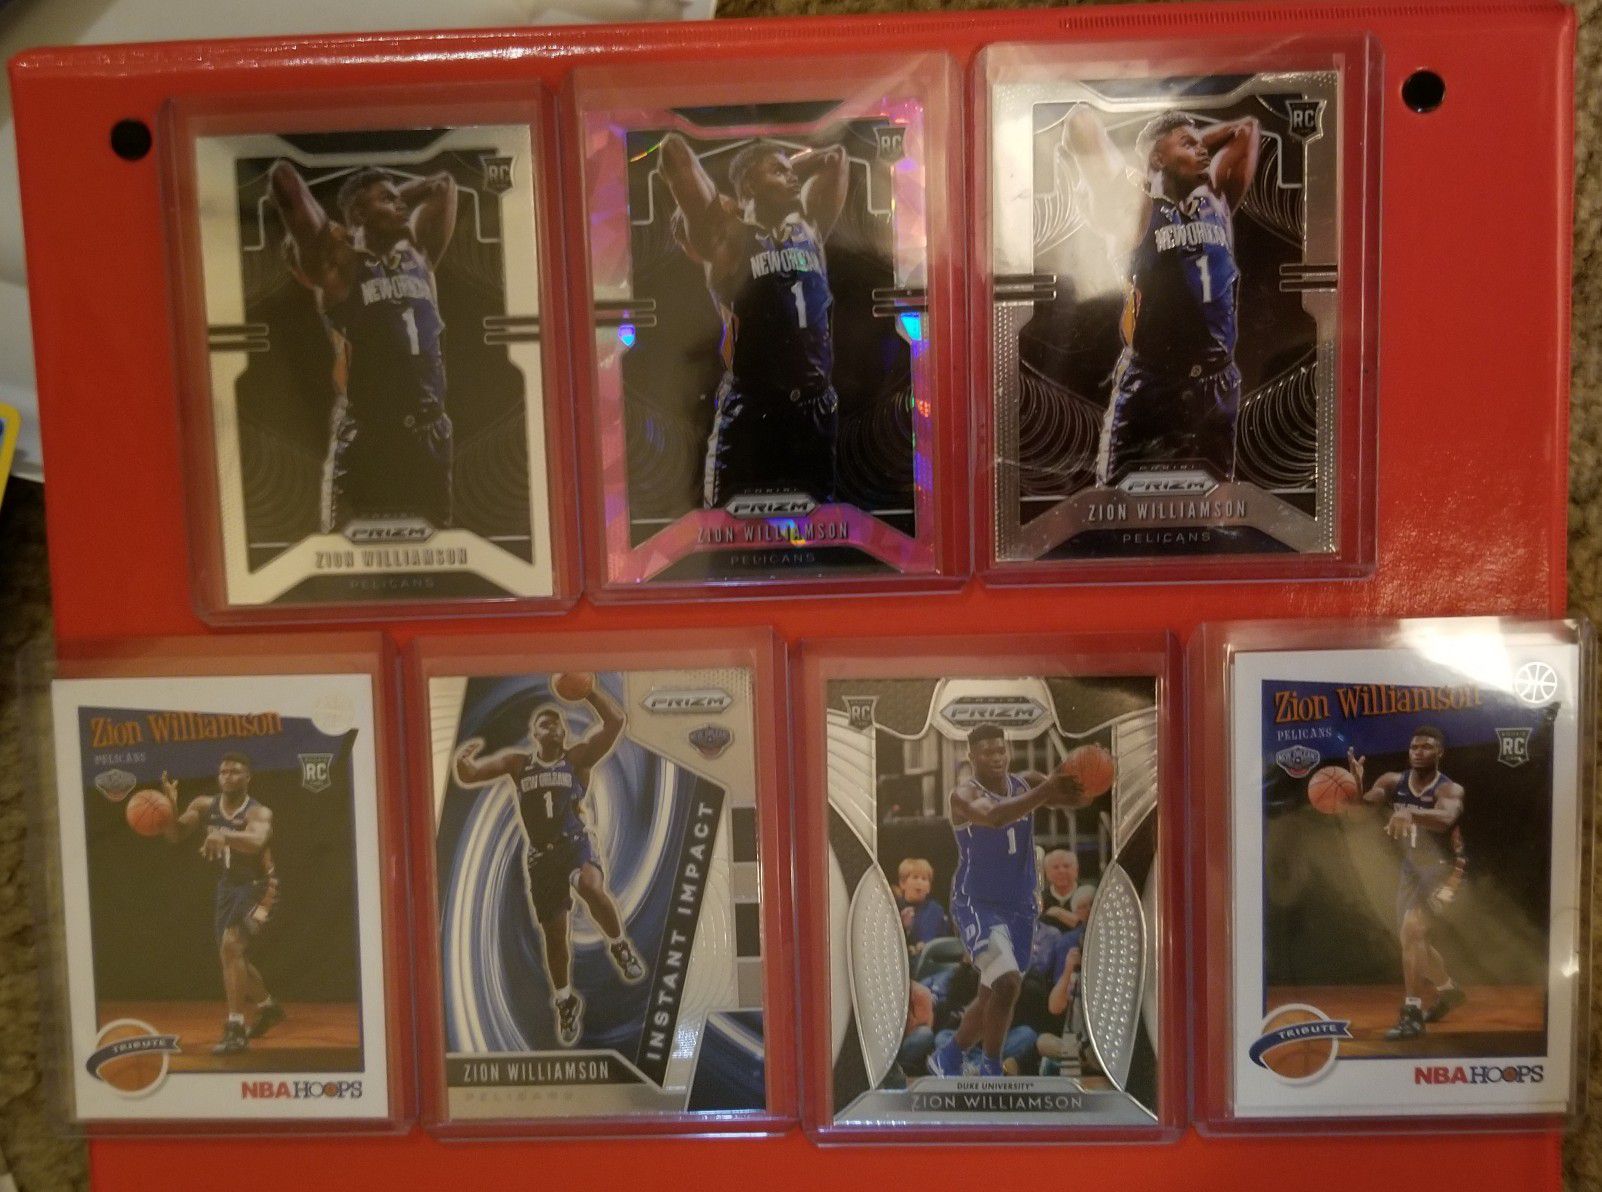 ZION WILLIAMSON 2019-20 Prizm, Prizm Draft picks & Hoops rookie card lot. 16 cards in total Including a Pink ice Prizm rookie